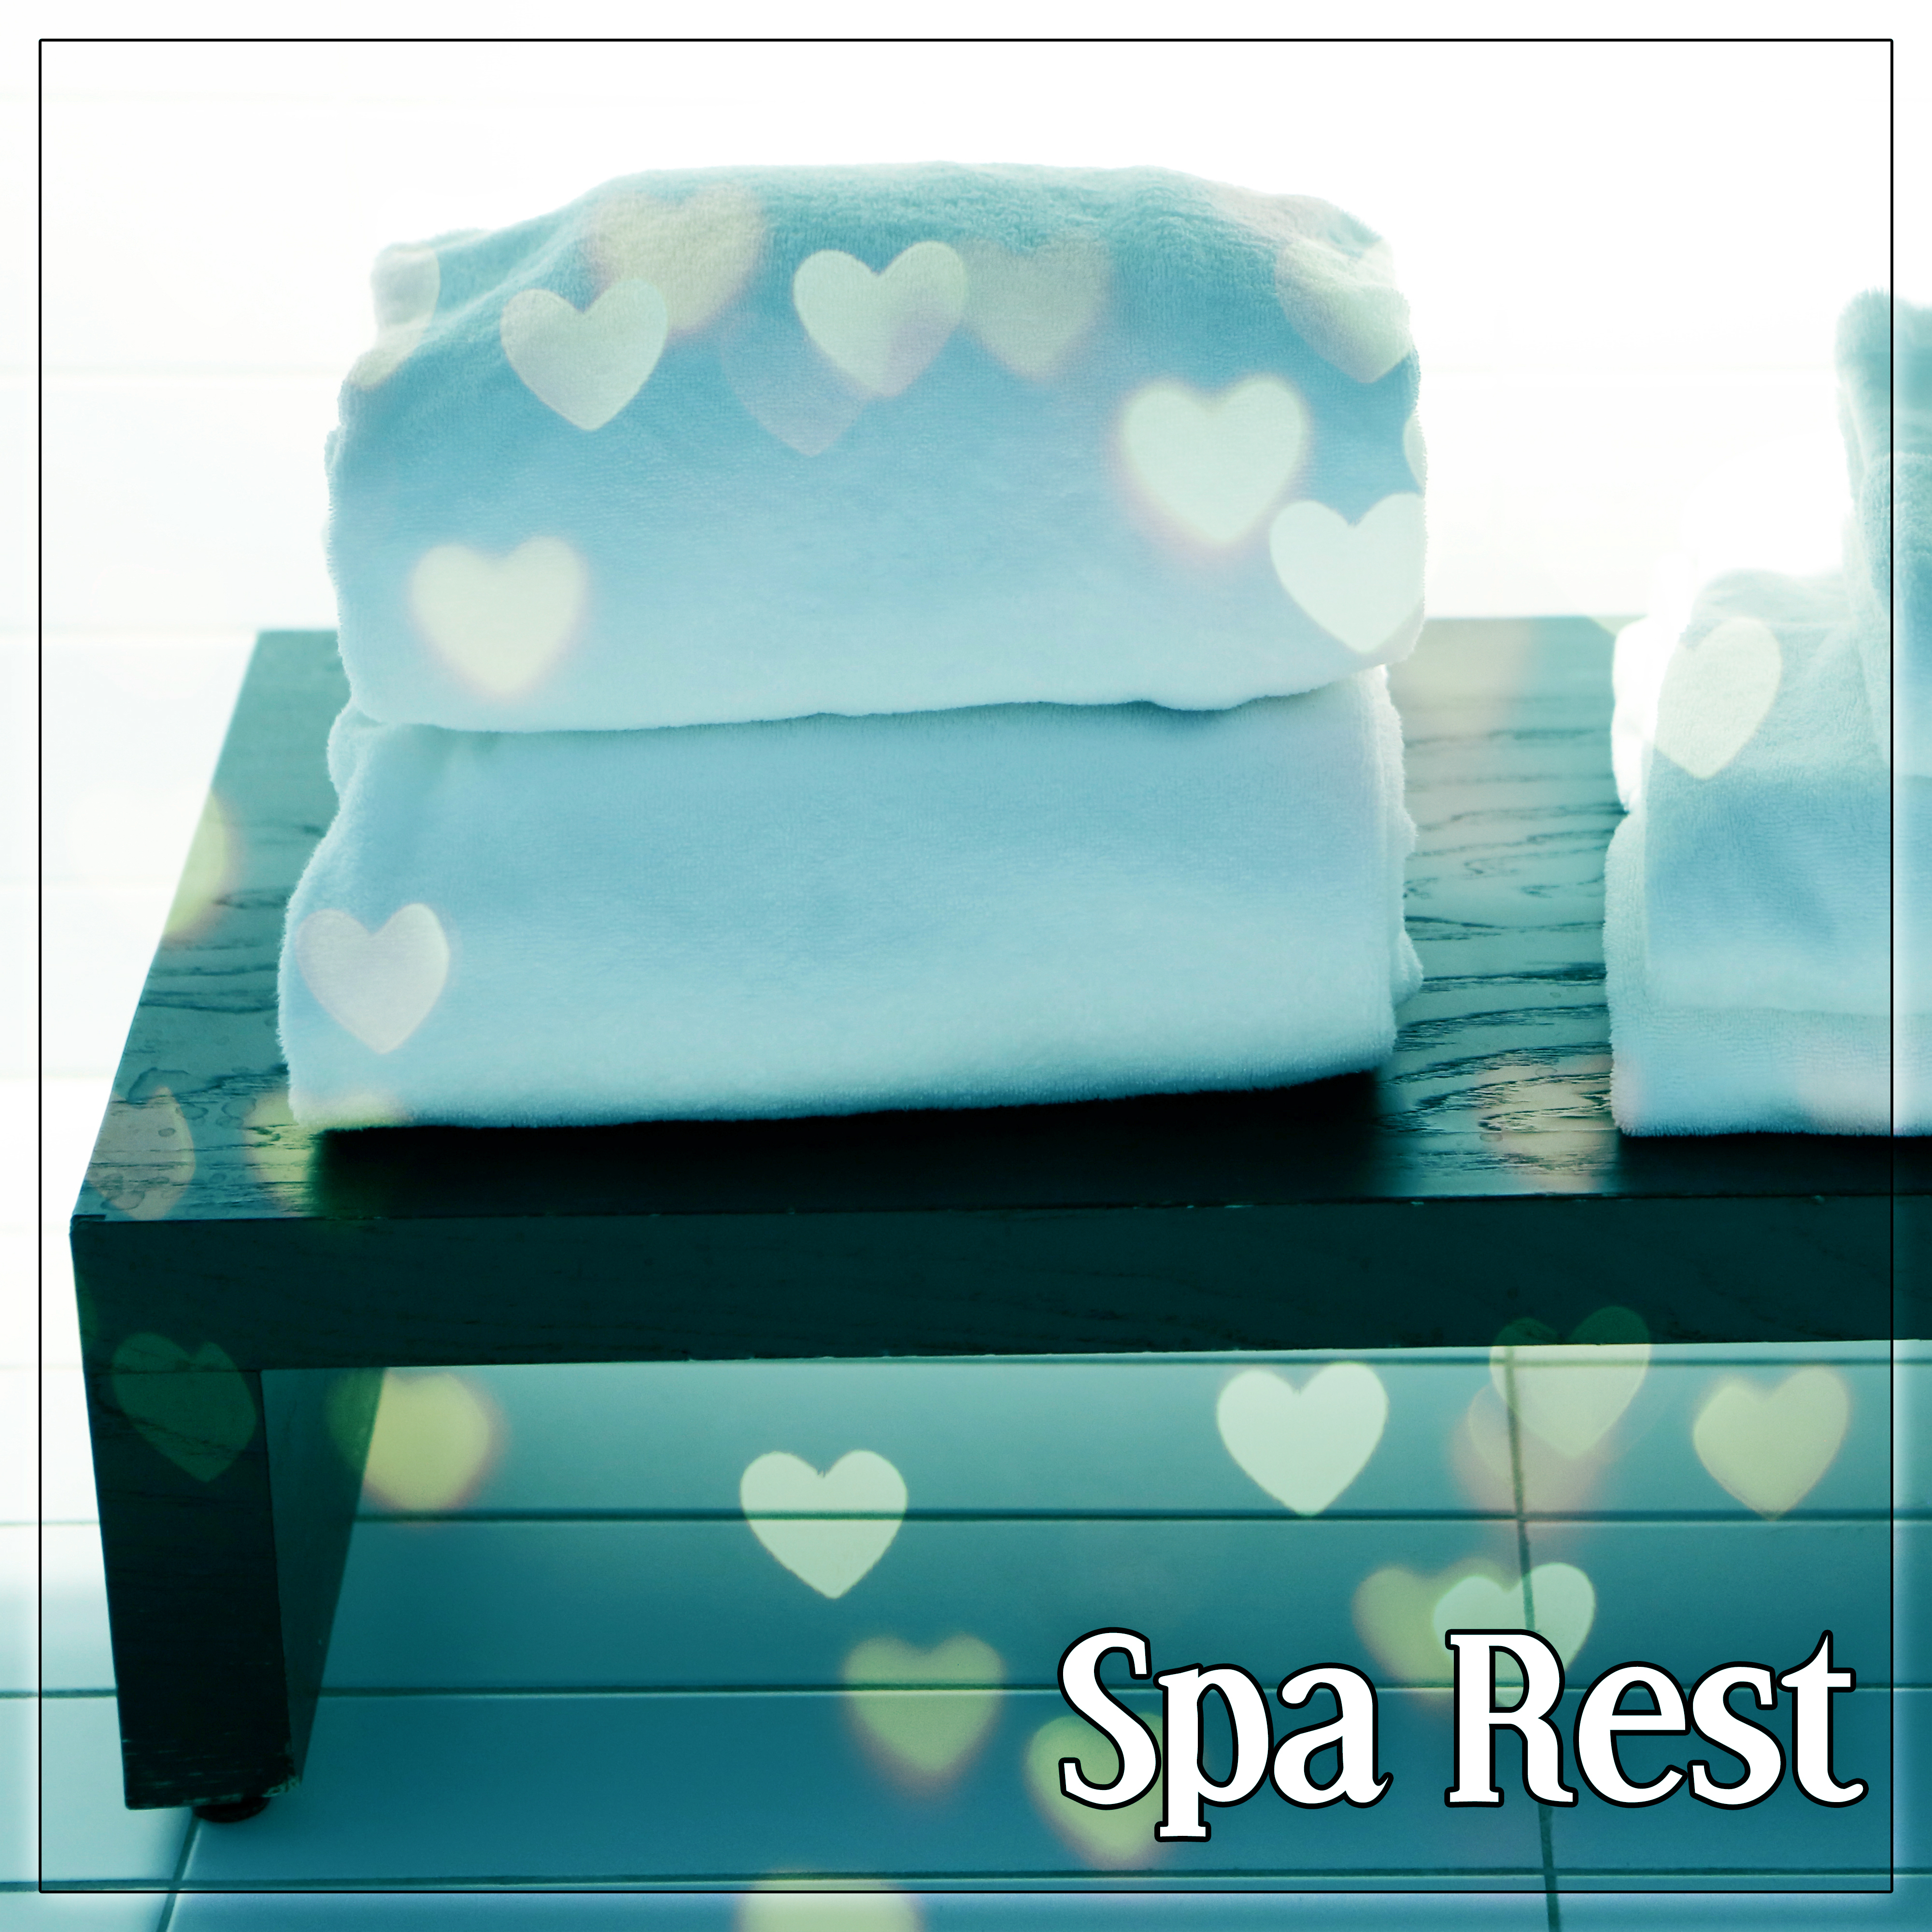 Spa: Rest  Waves, Deep Ambience, Spa Therapy Music, Calmness, Easy Listening